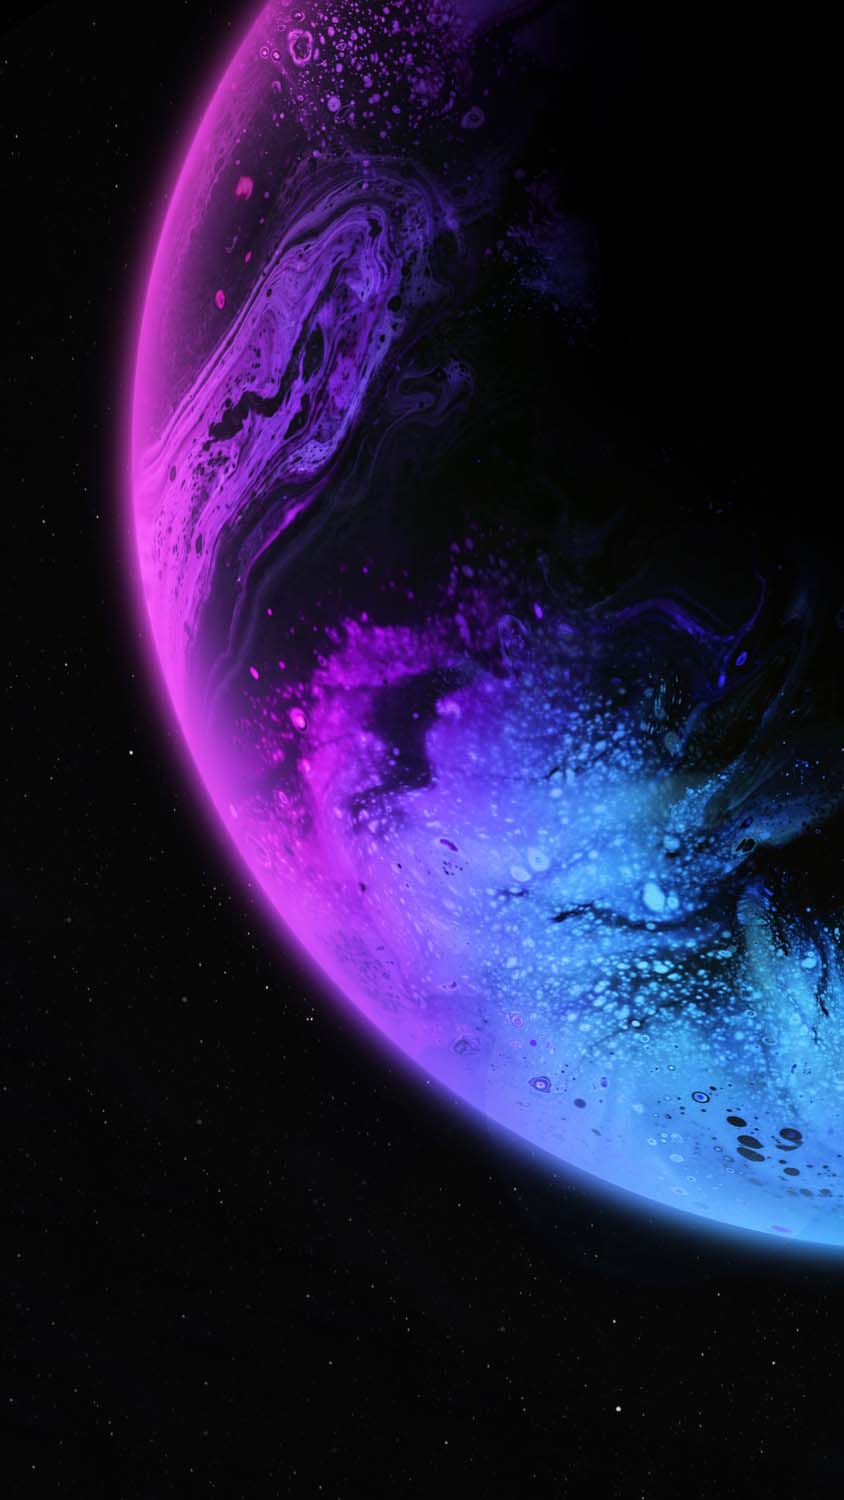 Glowing Planet IPhone Wallpaper HD - IPhone Wallpapers : iPhone Wallpapers